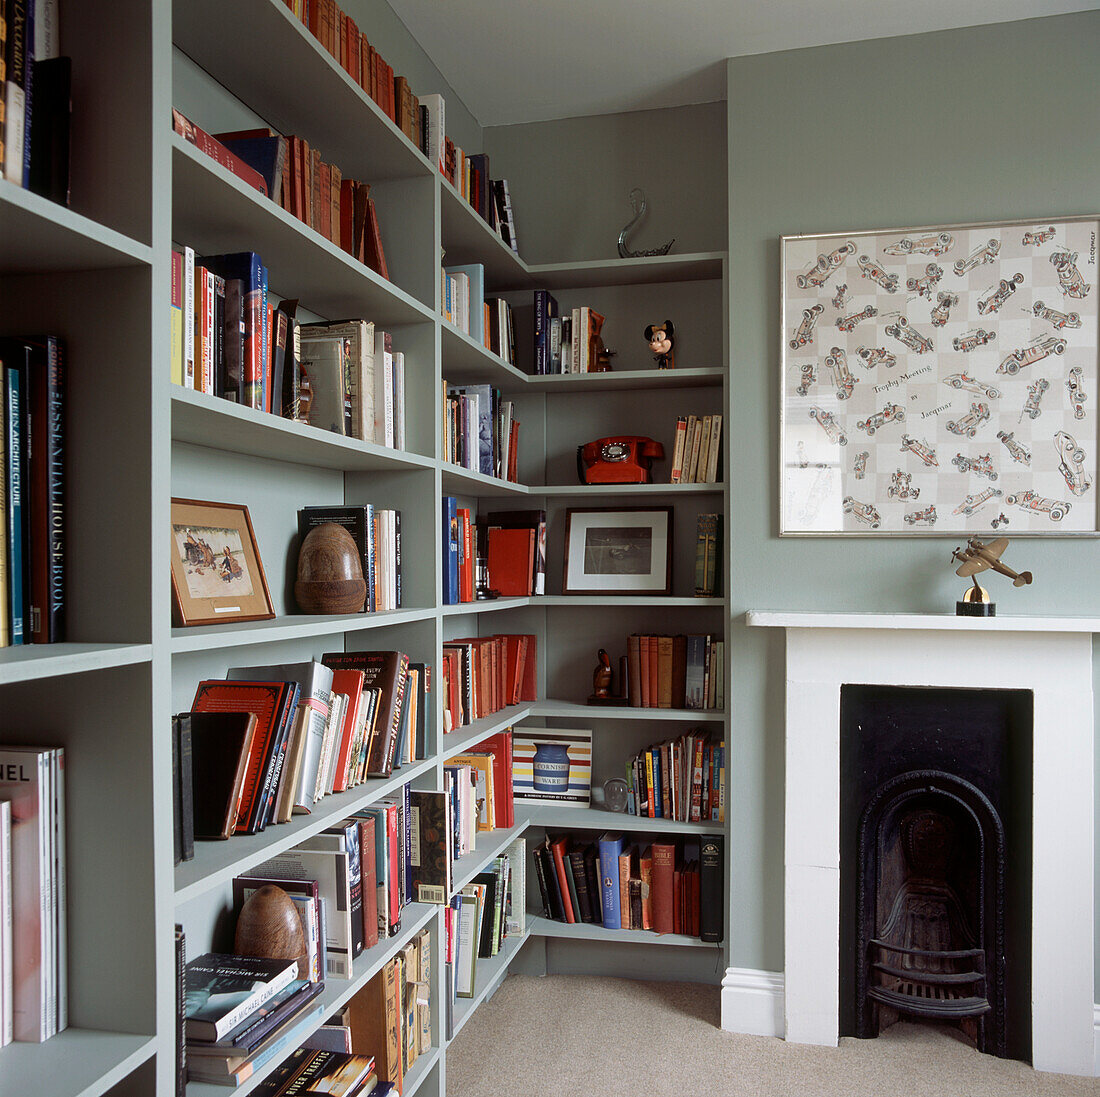 Study with racks of open shelving and storage space for books